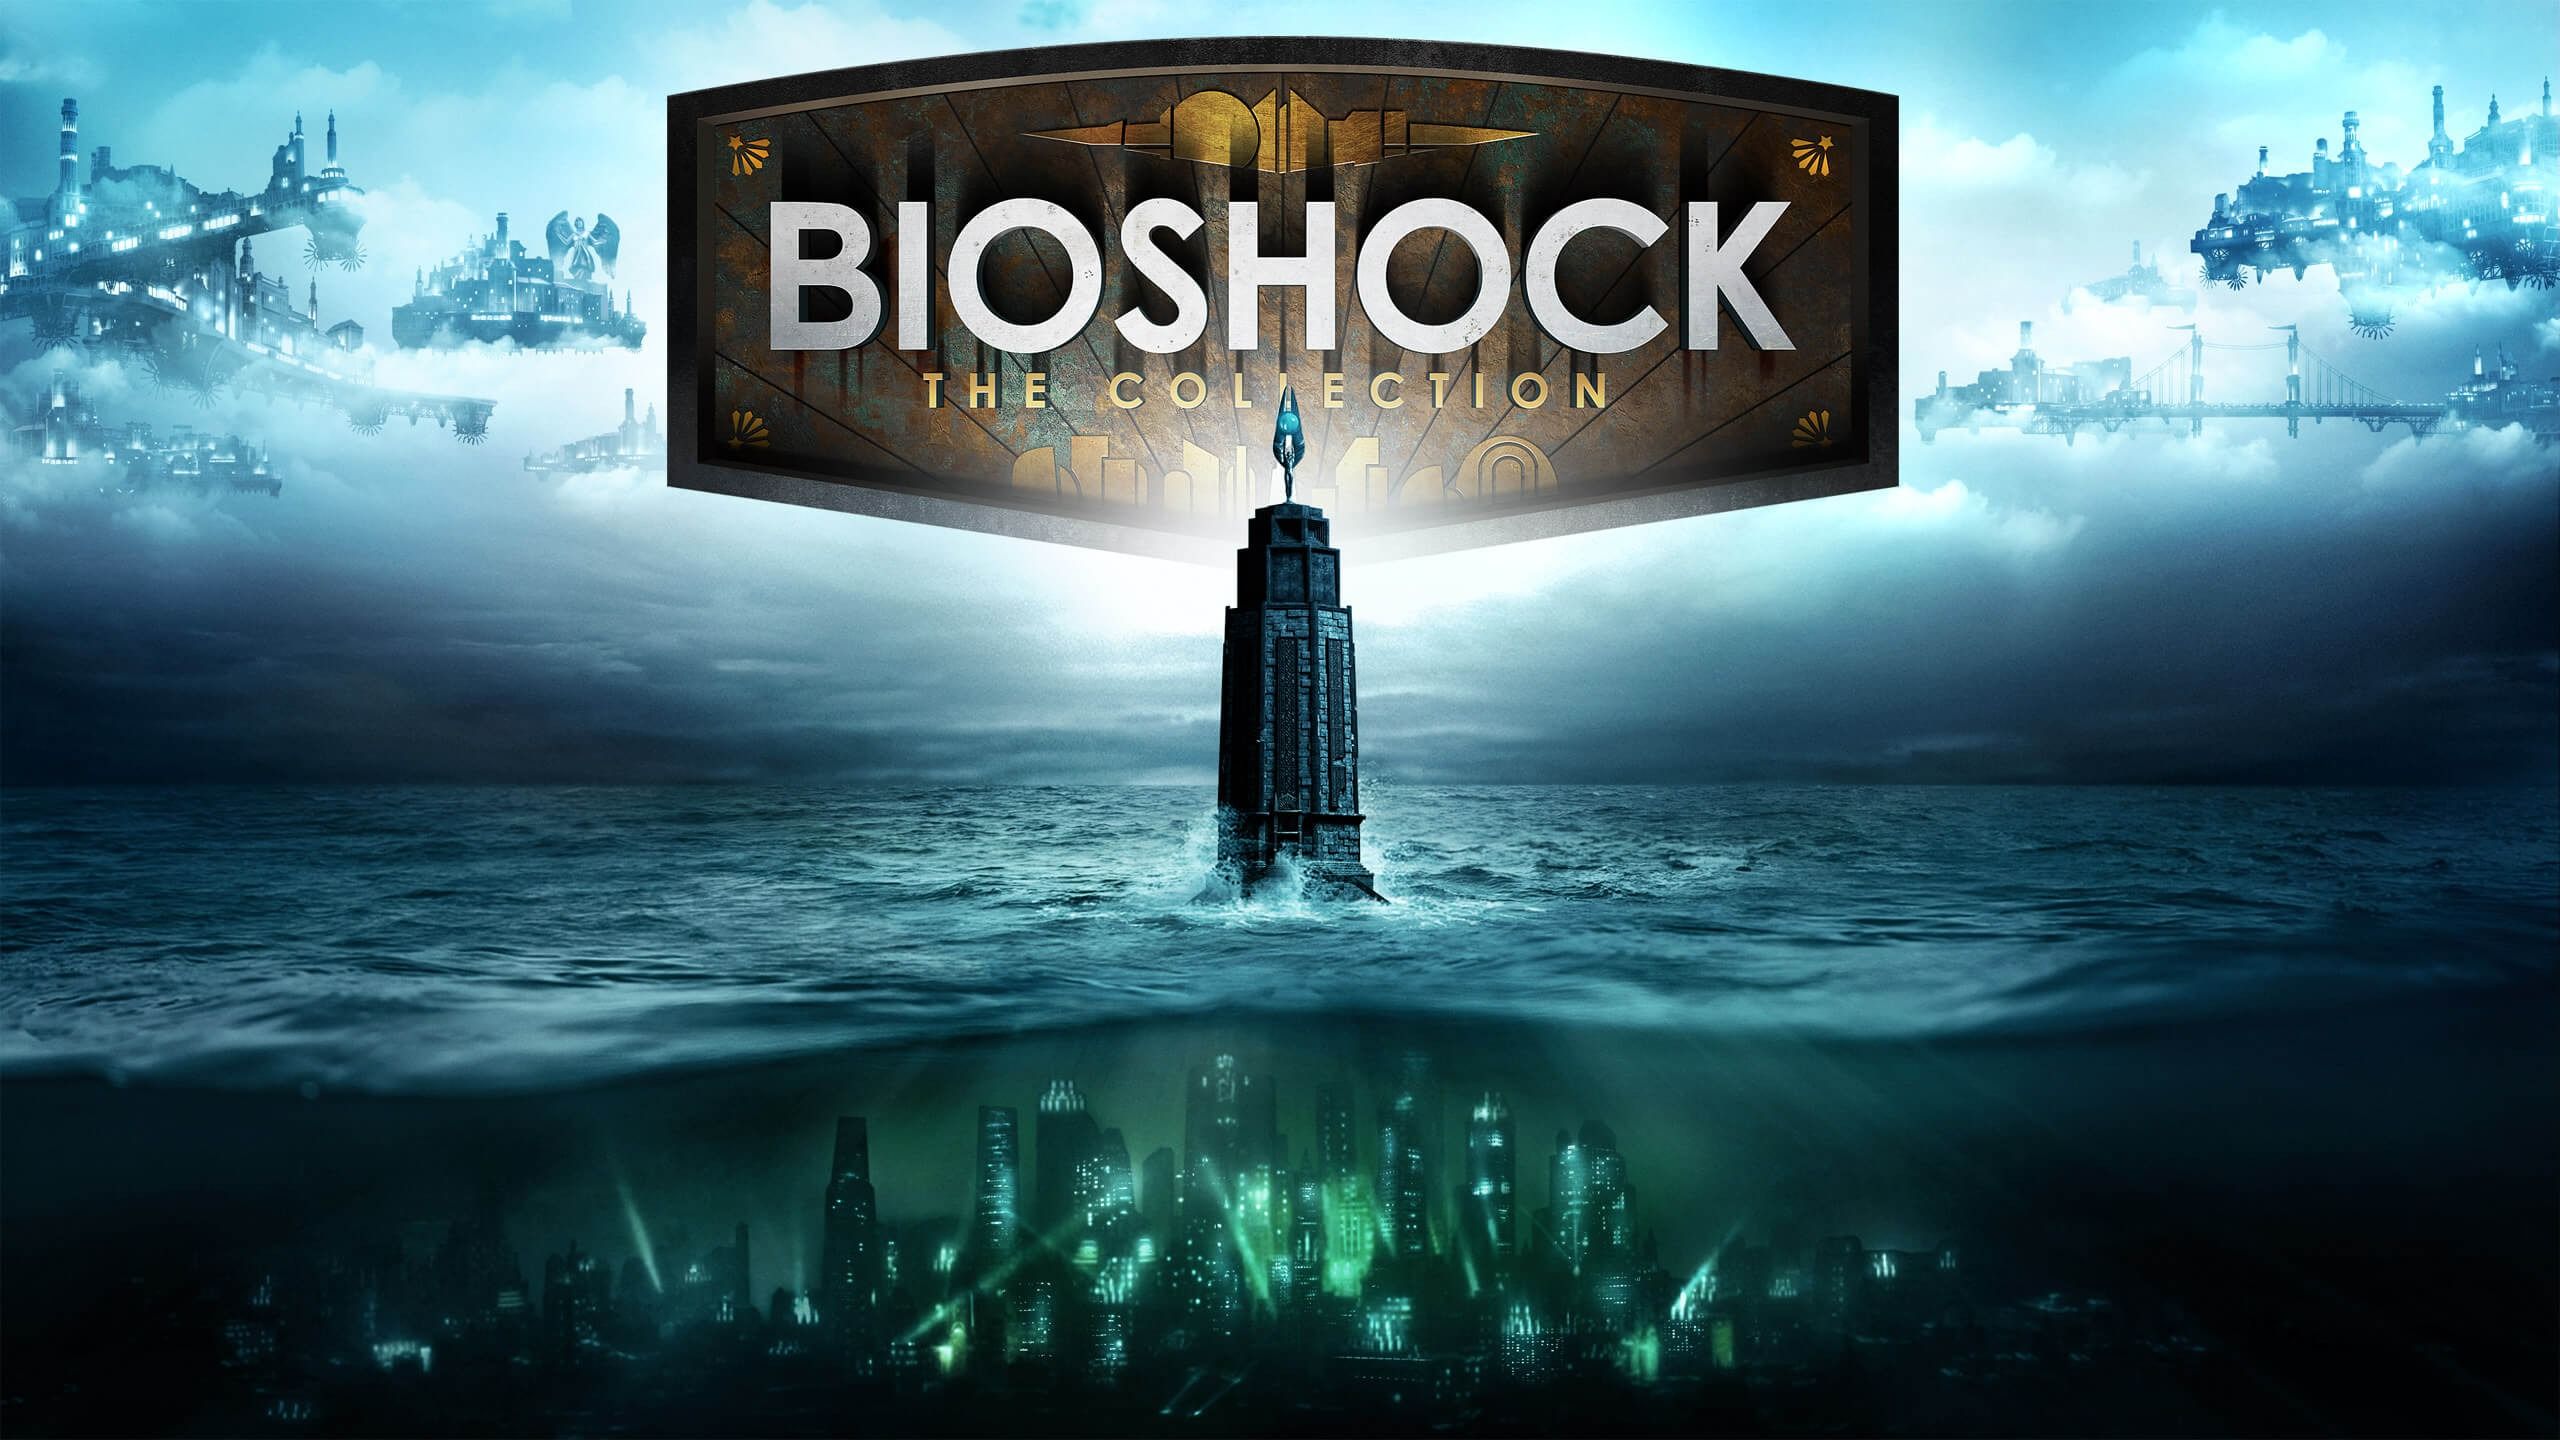 Bioshock - The Collection Global Xbox One/Series